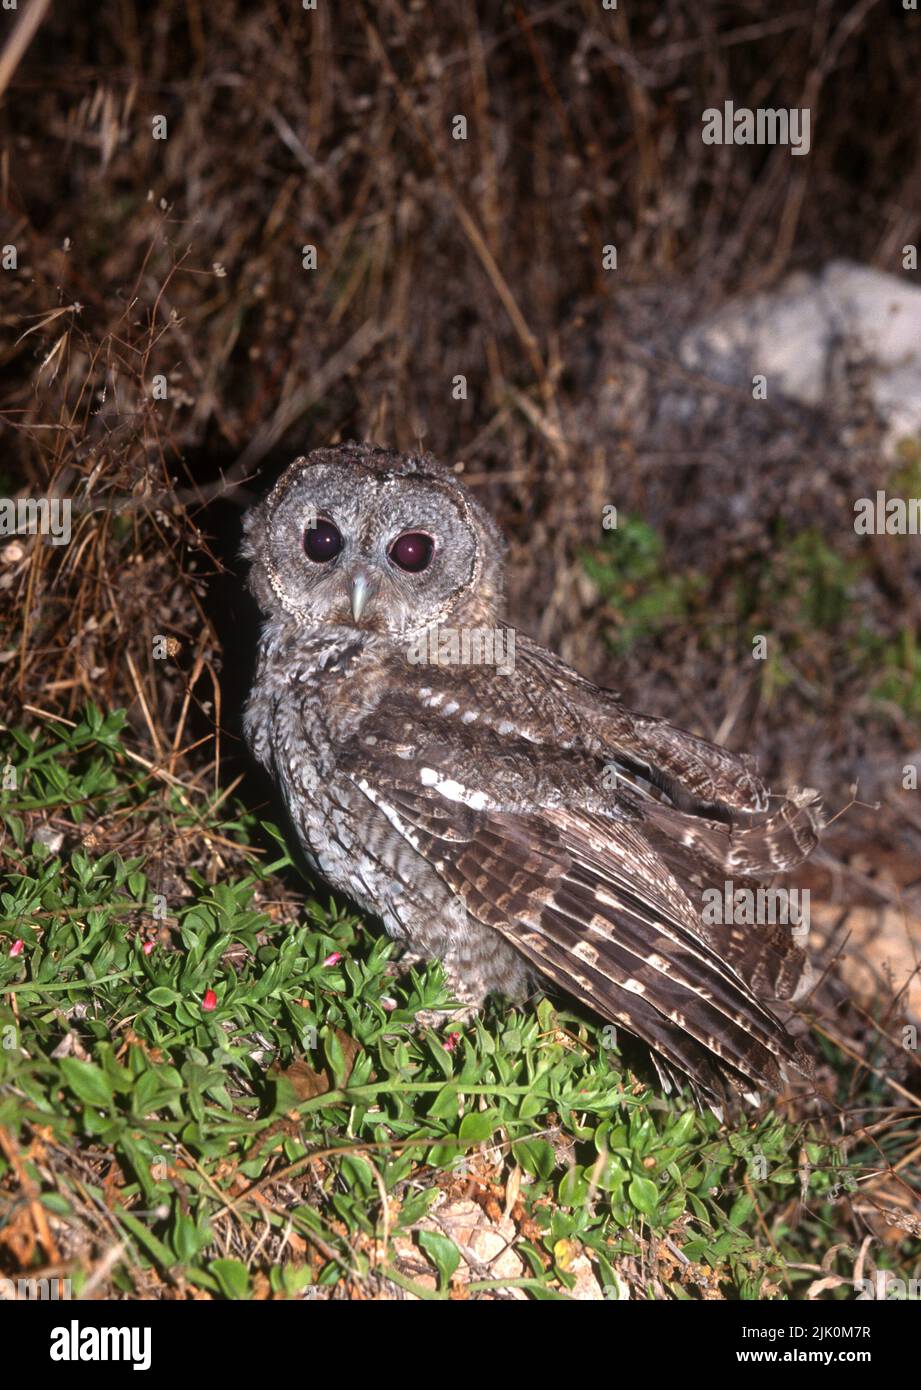 Tawny Owl or Brown Owl (Strix aluco) Photographed in Israel Stock Photo